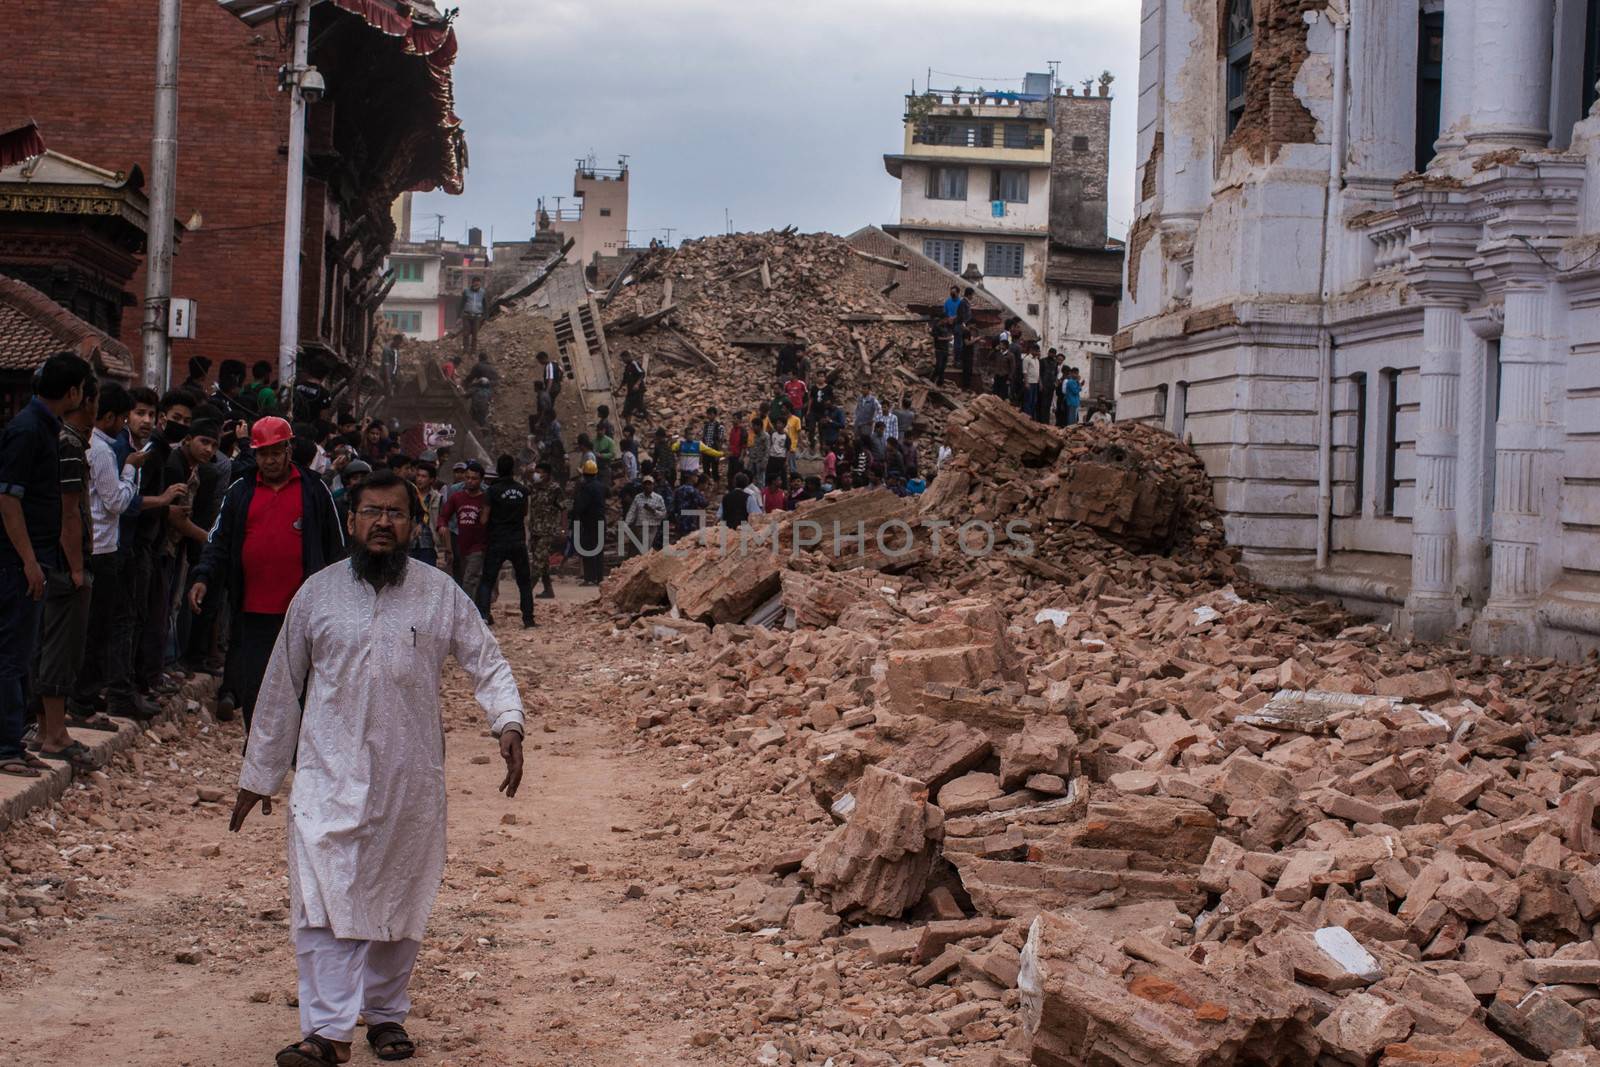 NEPAL,Kathmandu: People walk in the rubble in Kathmandu's Durbar Square on April 25, 2015, after a magnitude 7.8 earthquake hit the area.More than 8,000 people died in the quake and some 3.5 million were left homeless. 